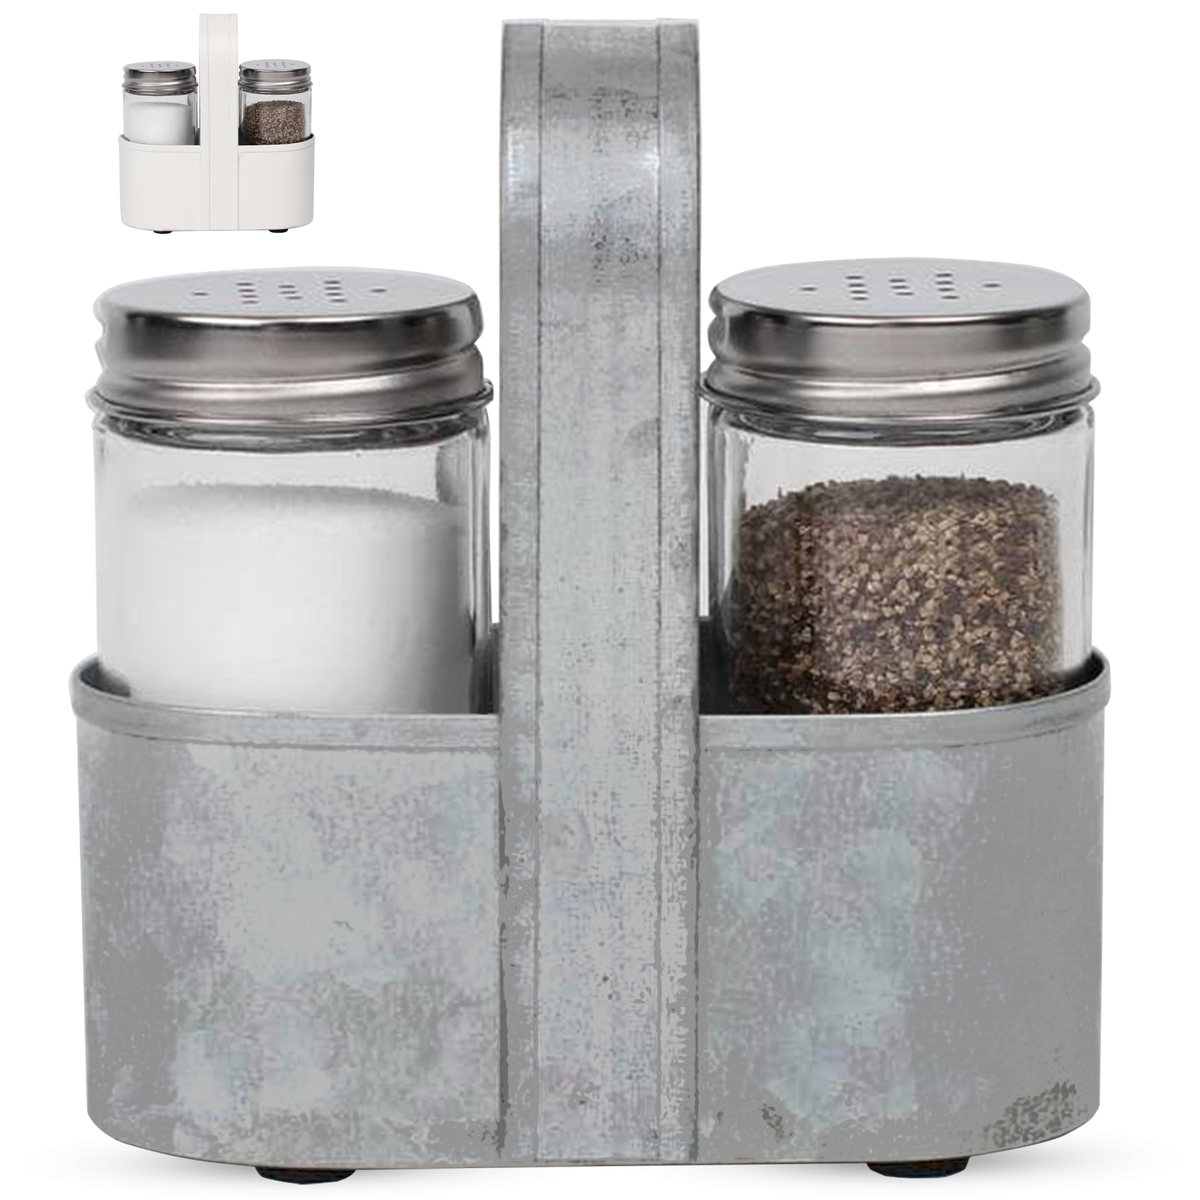 Galvanized Salt and Pepper shakers set by Saratoga Home